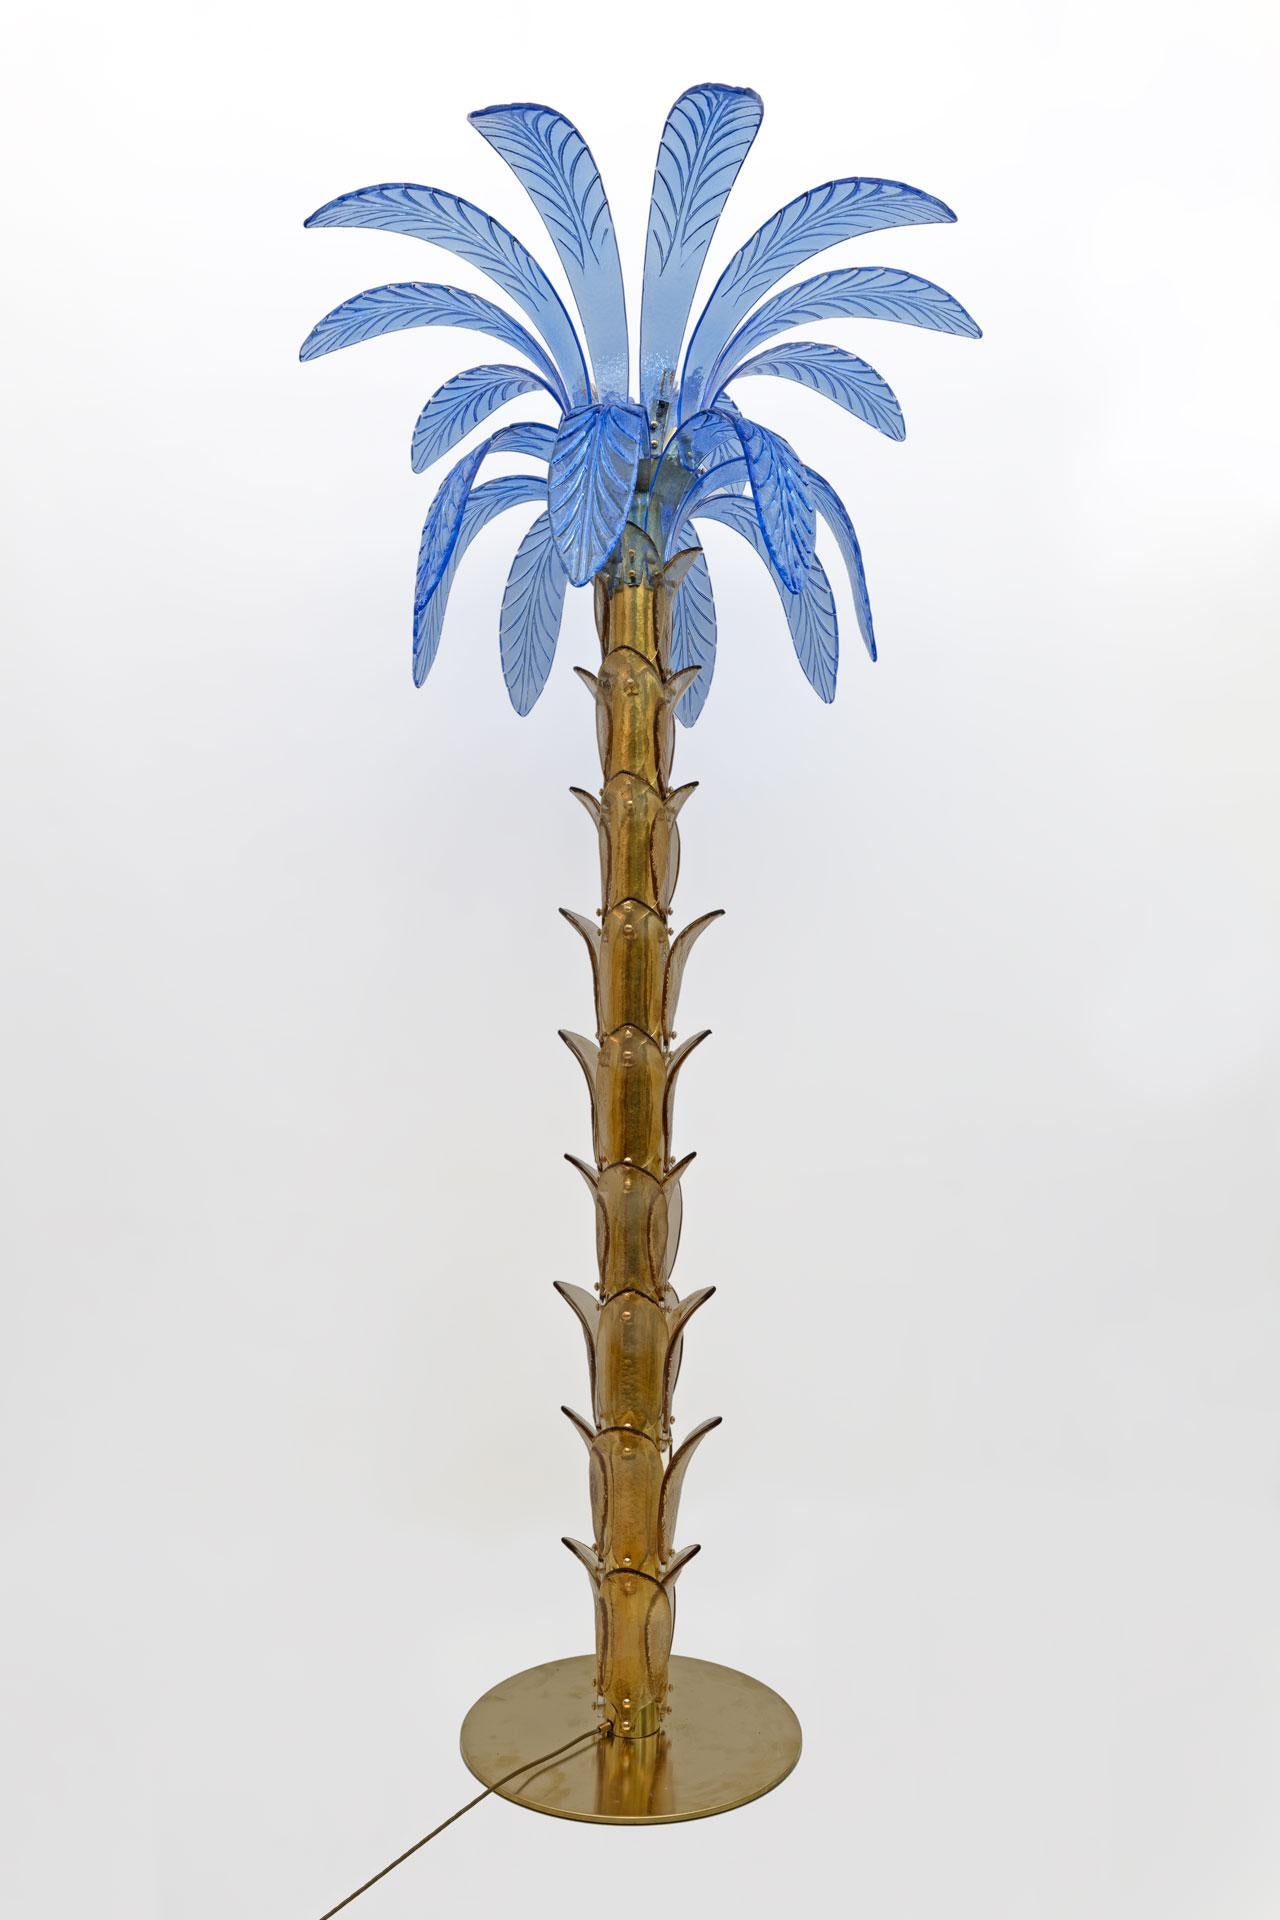 Floor lamp in amber and blue Murano blown glass, the structure is in brass, four bulbs. The floor lamp is also a sculpture that reproduces the trunk and leaves of a palm tree with pieces of glass.